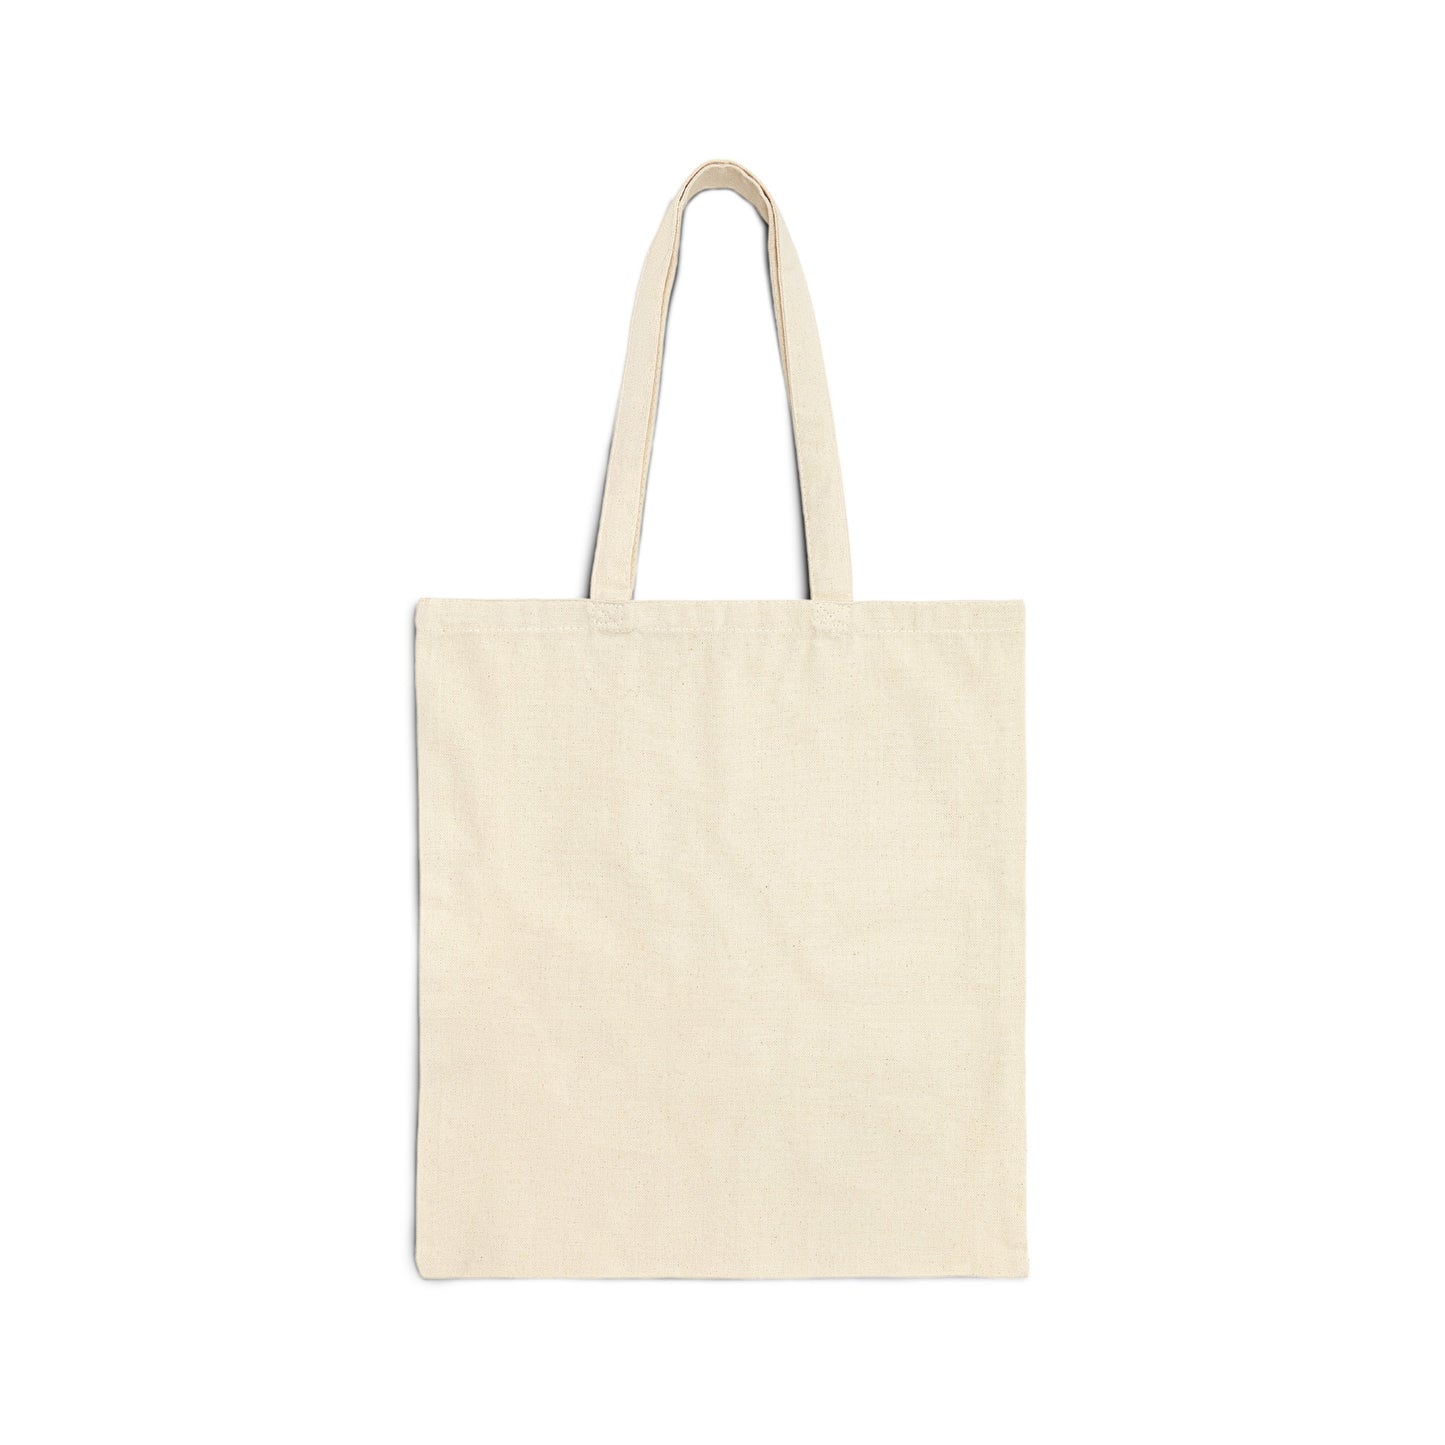 Lana-Del-Raybees Cotton Canvas Tote Bag